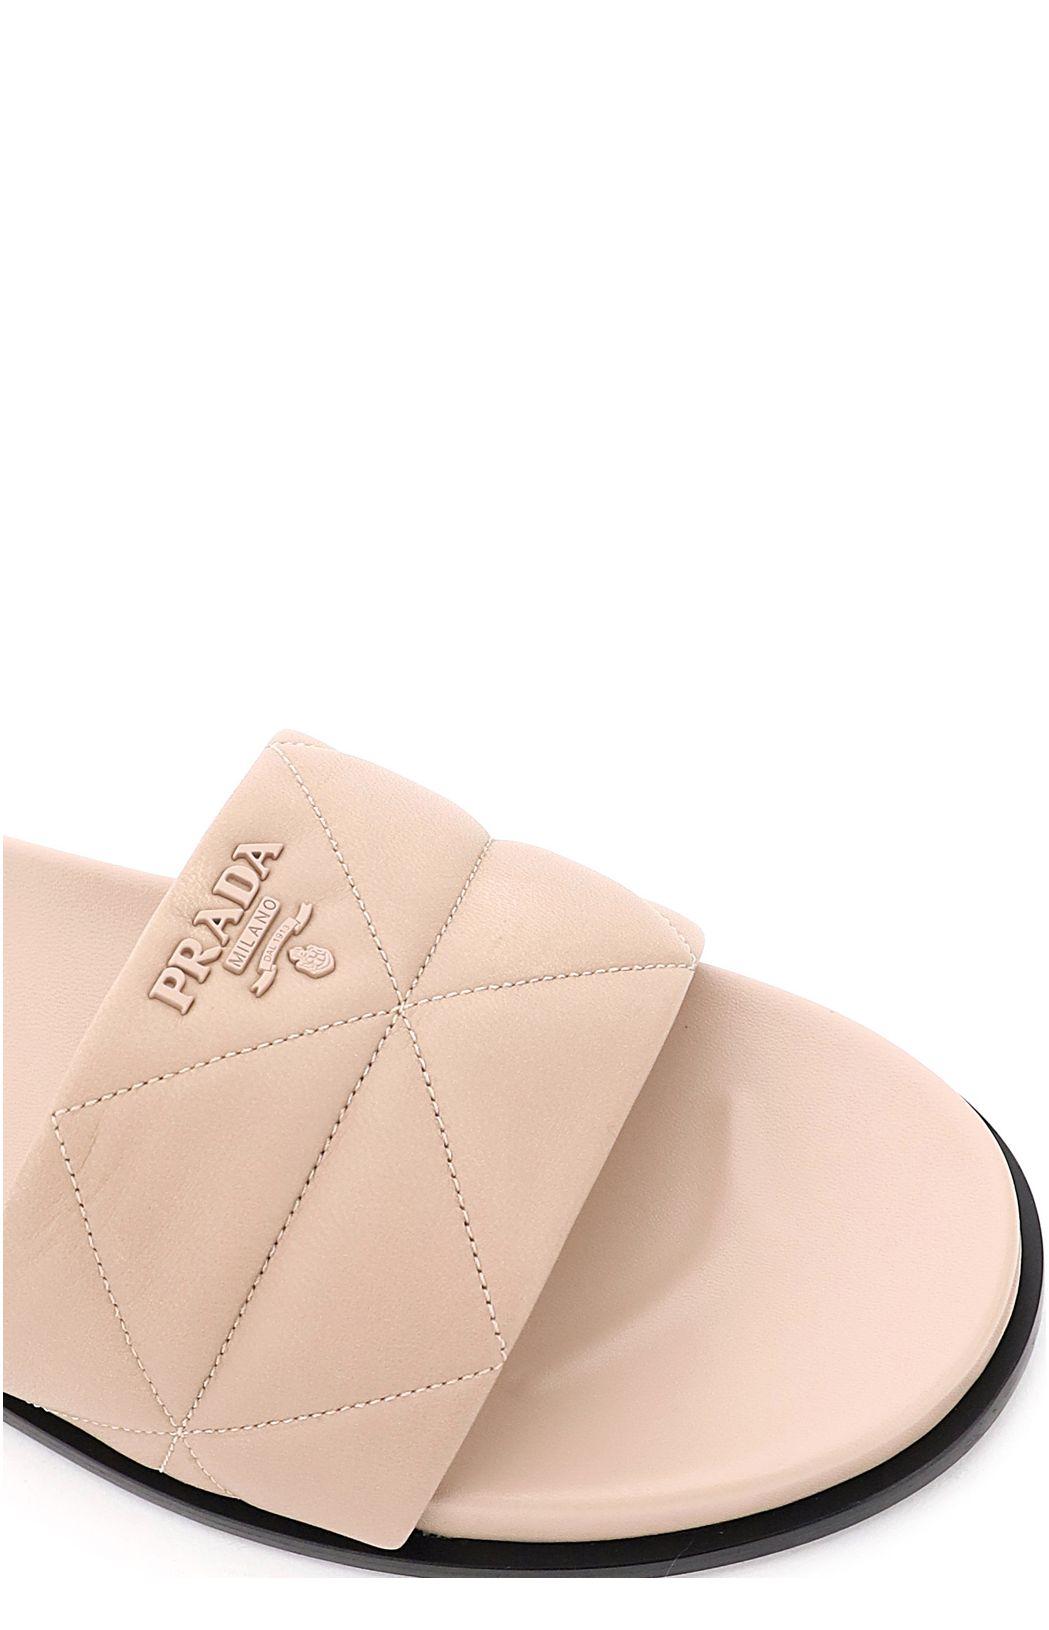 Prada Mules In Quilted Nappa 36 Leather in Beige (Pink) - Lyst